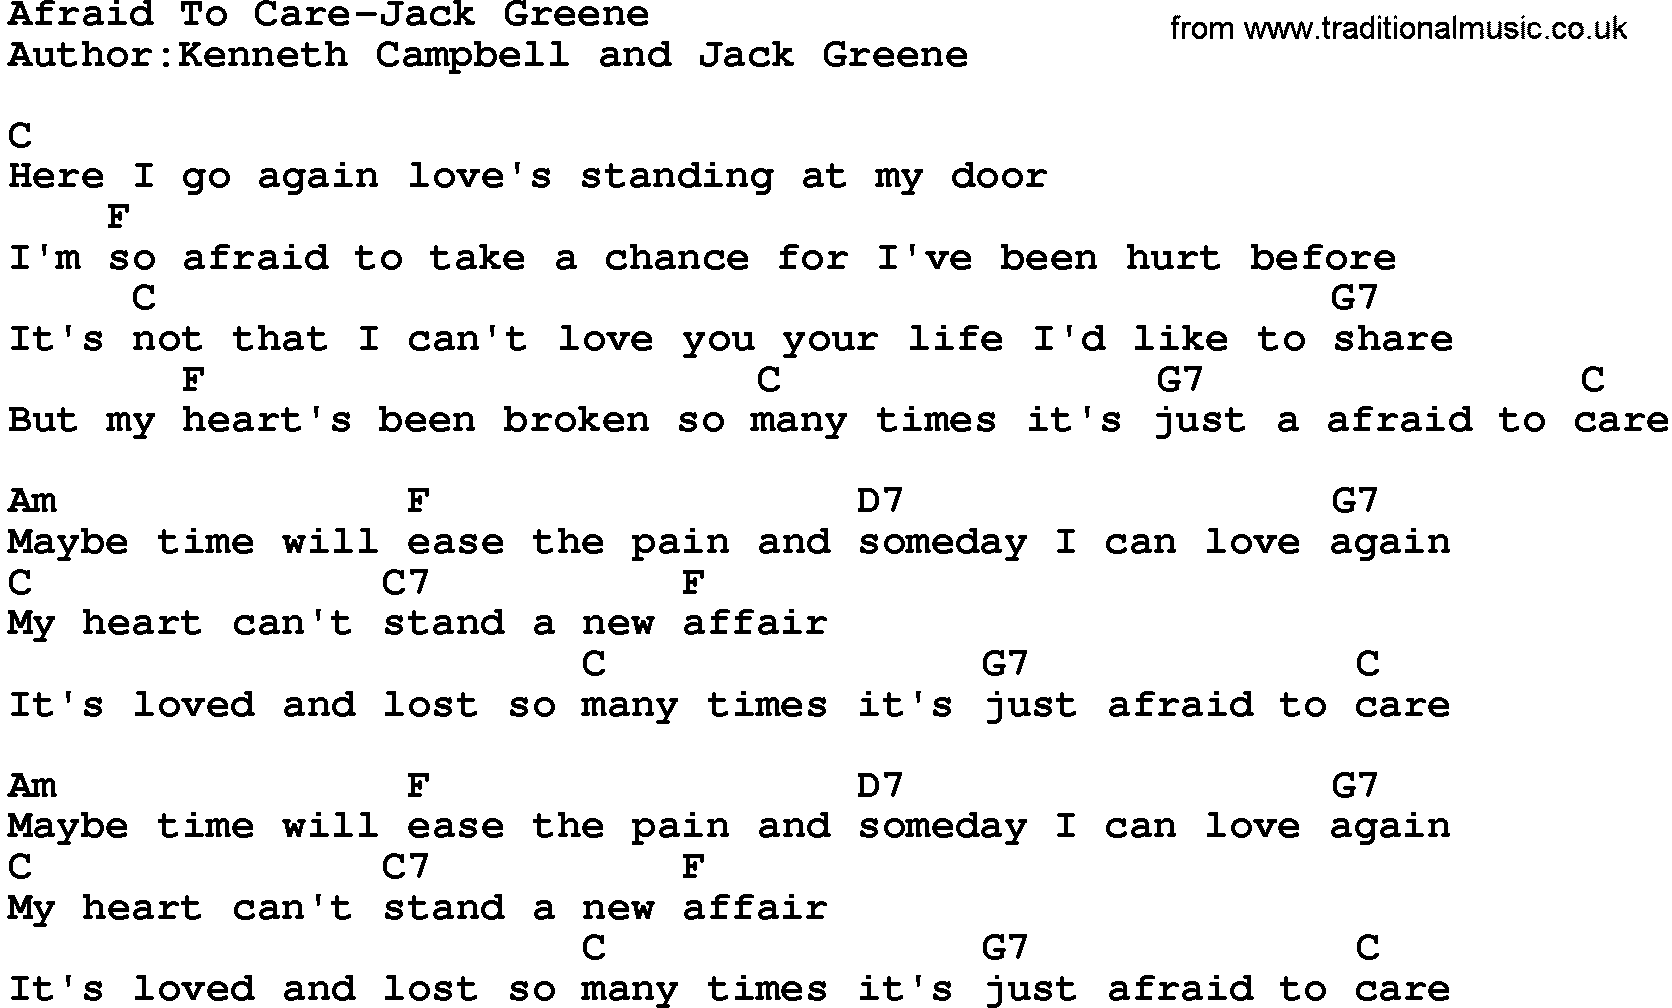 Country music song: Afraid To Care-Jack Greene lyrics and chords